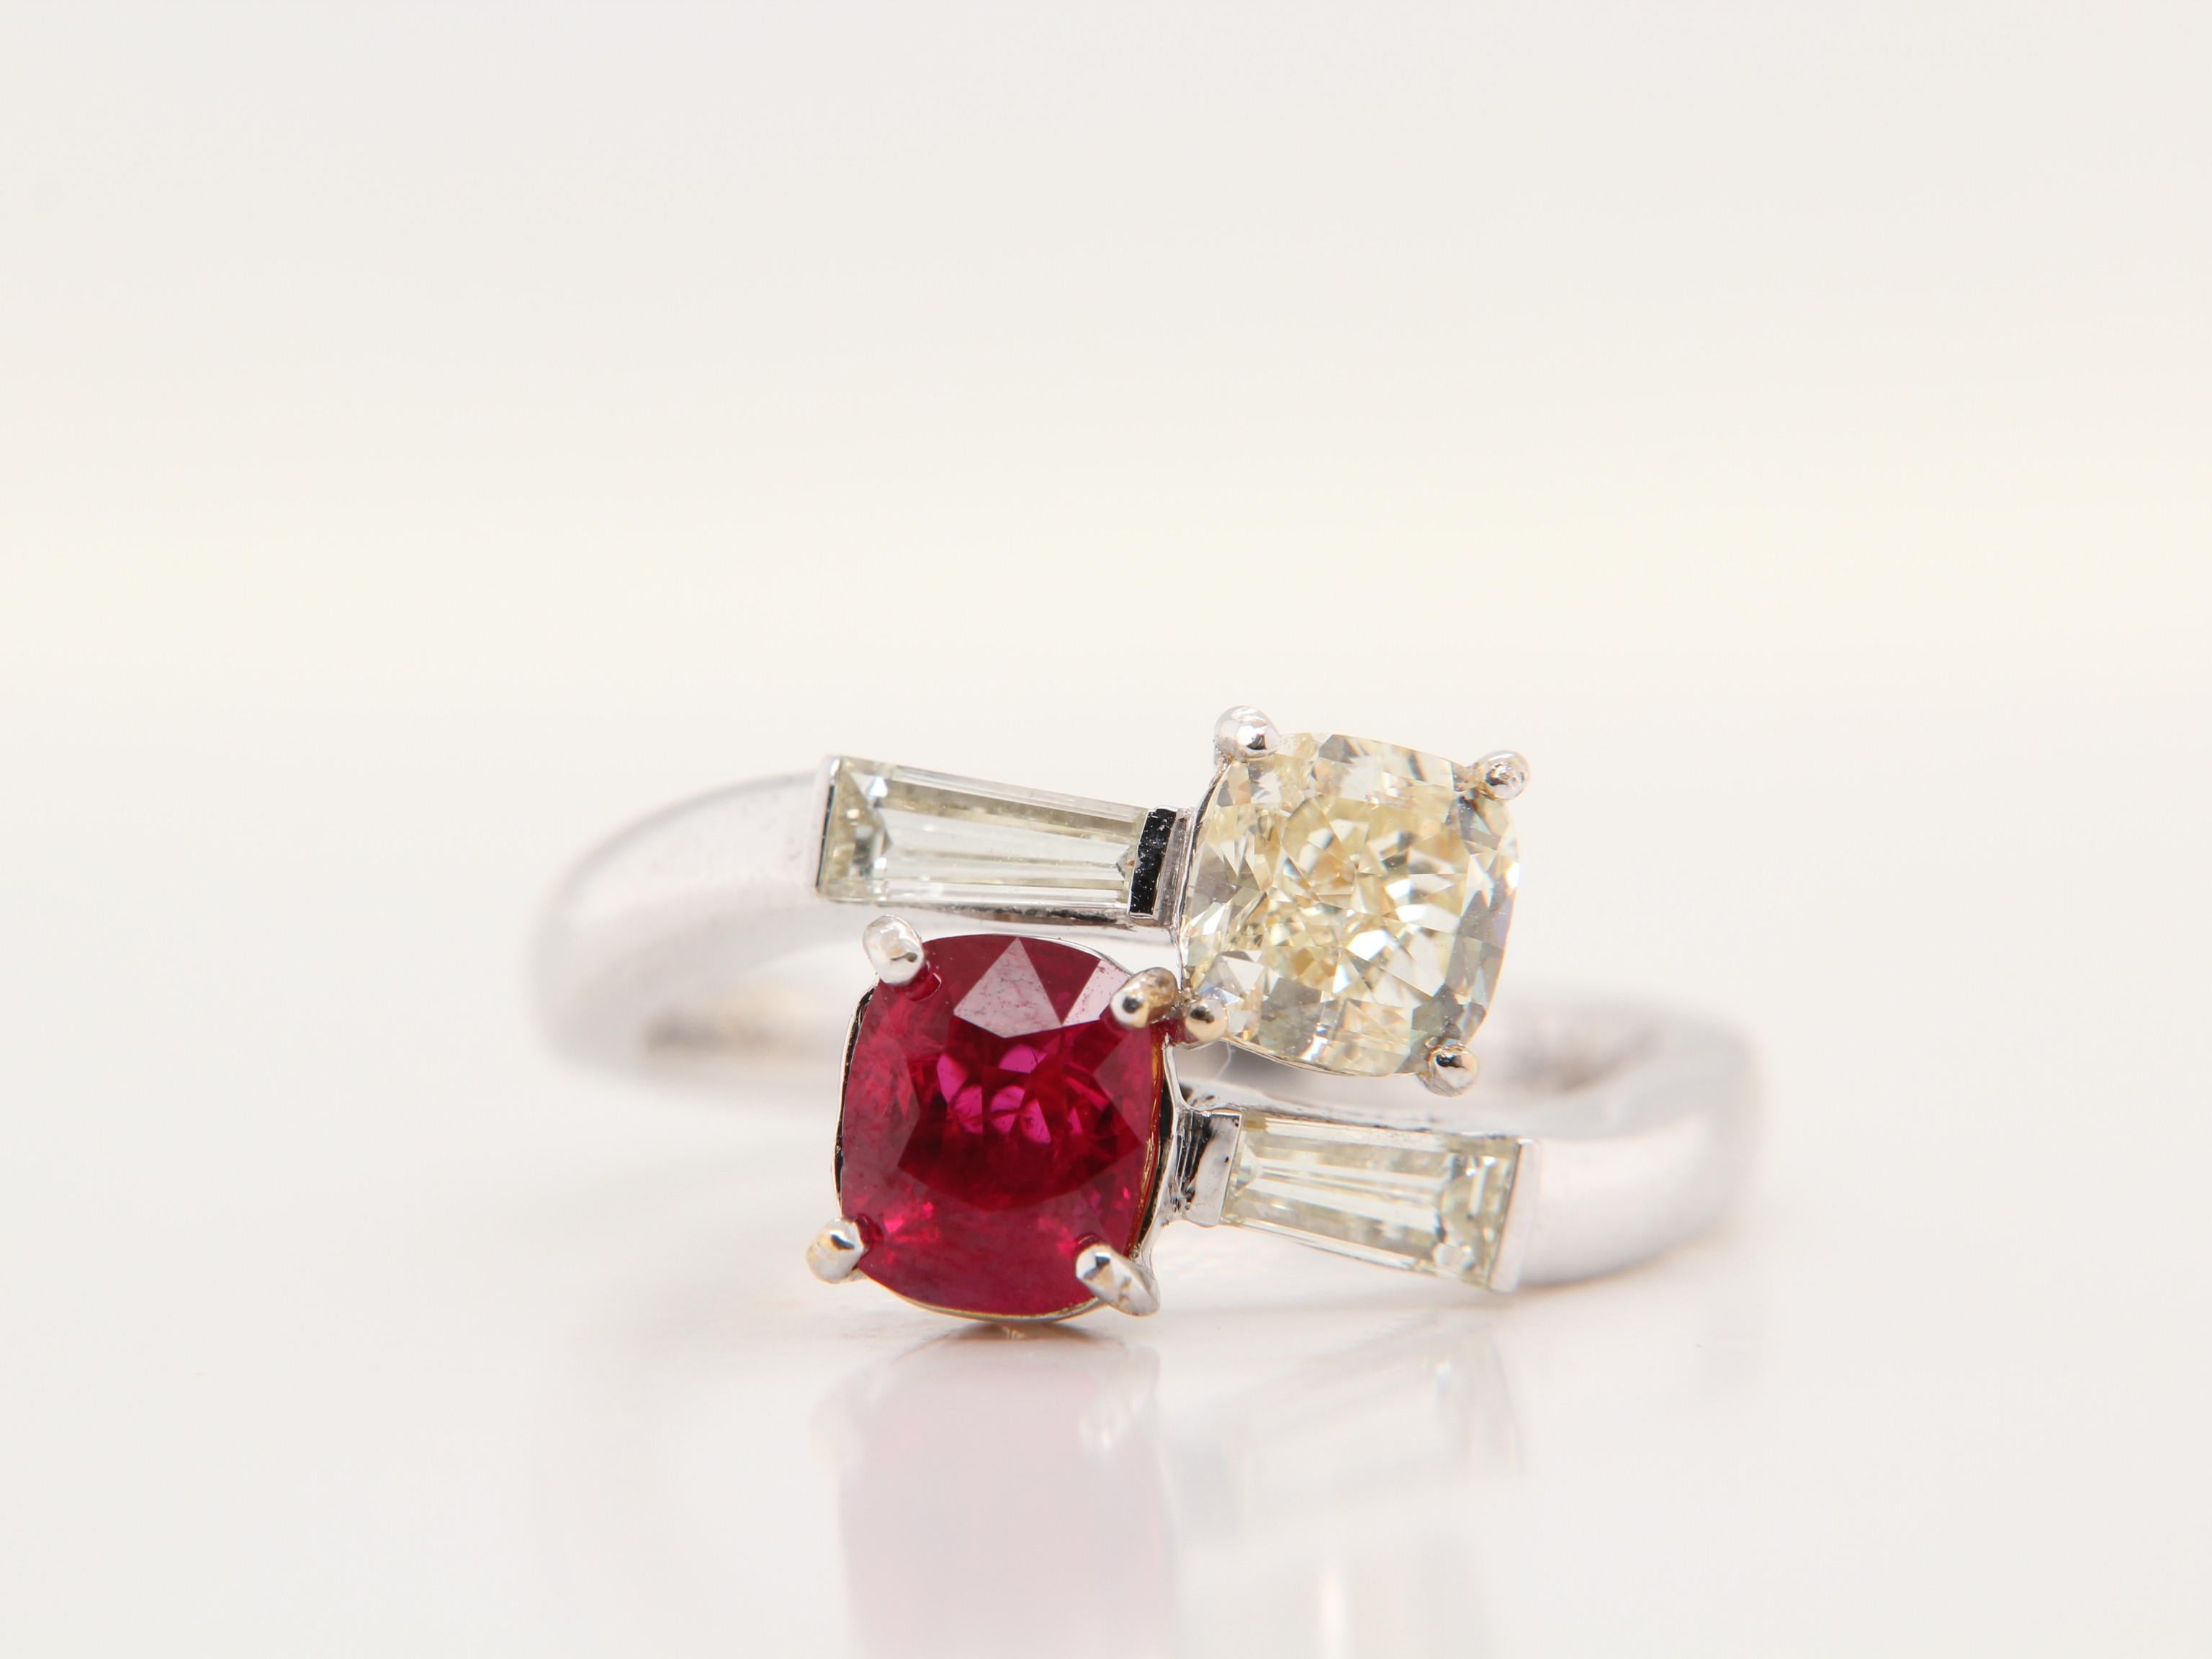 A brand new modern themed Burmese ruby and diamond ring. The combination of the sparkling 1.15ct diamond compliments the lustrous ruby helps the ring  to be very eye catching.  The ruby weighs 1.13 carat and is certified by Gem Research Swisslab